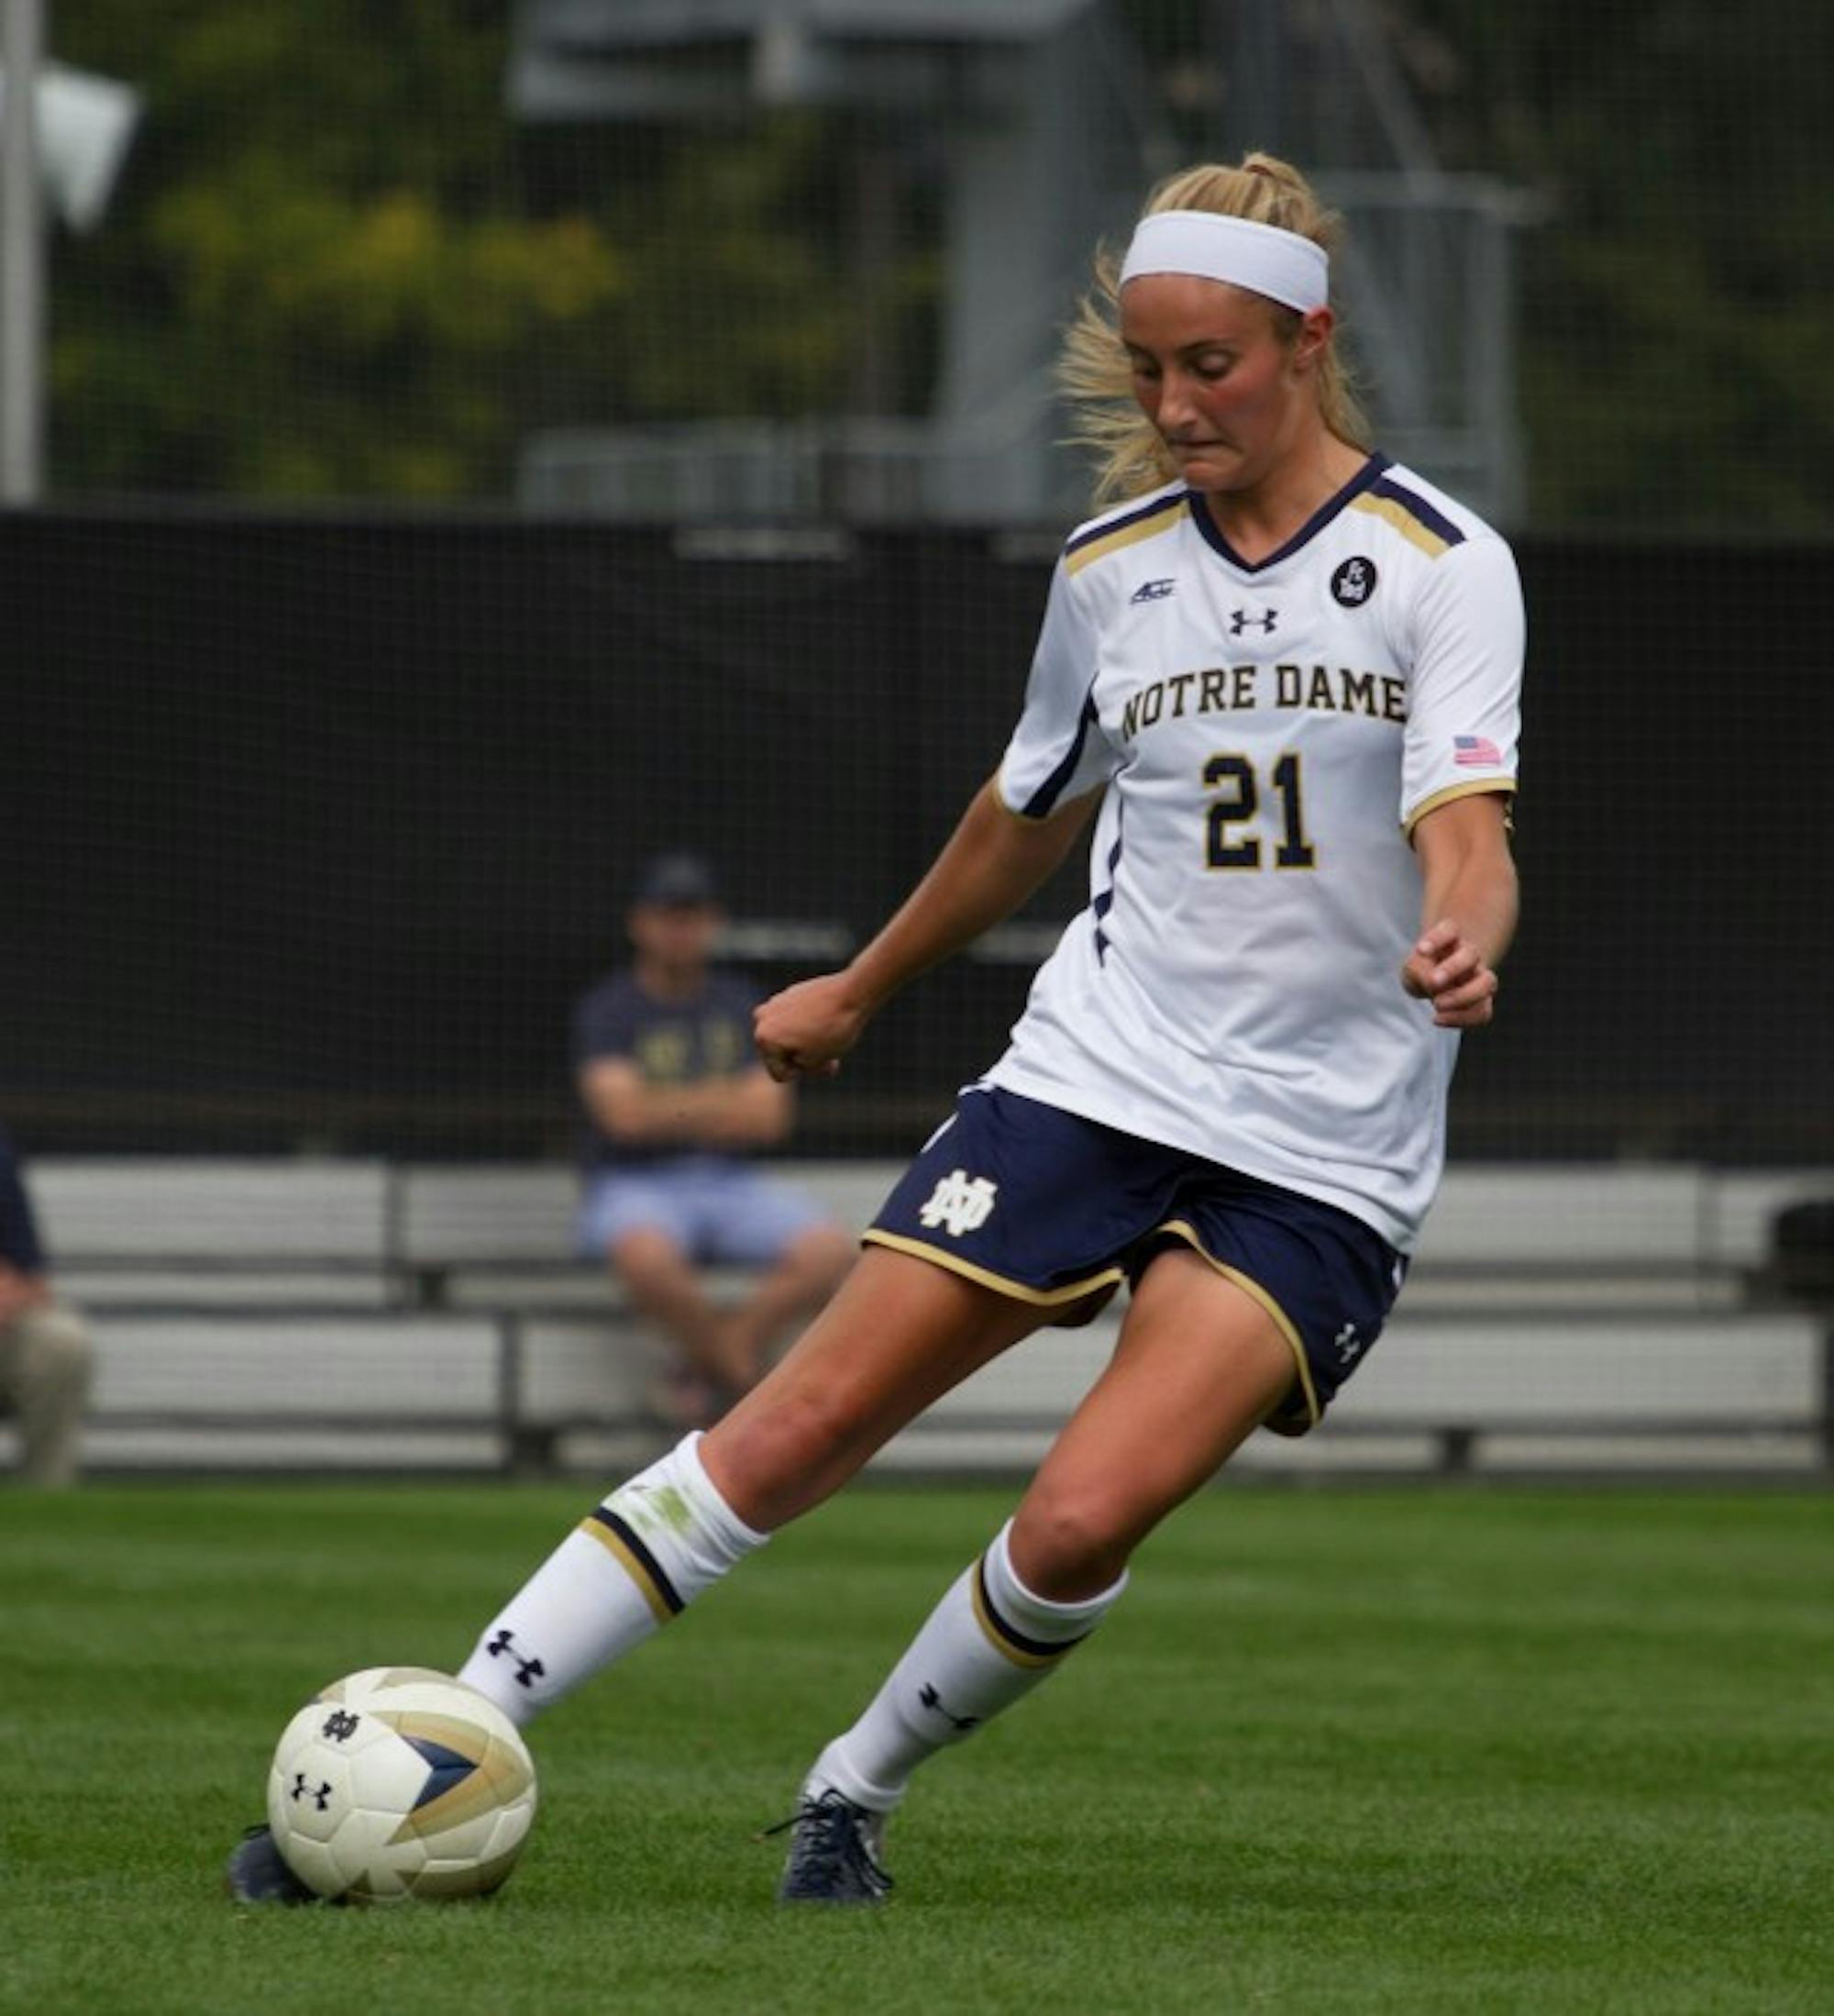 Irish senior defender Brittany Von Rueden crosses the ball into the box during Notre Dame’s 1-0 loss against Florida State on Sept. 27 at Alumni Stadium. Ruedan has three assists this season for the Irish, which has her tied for third on the team.